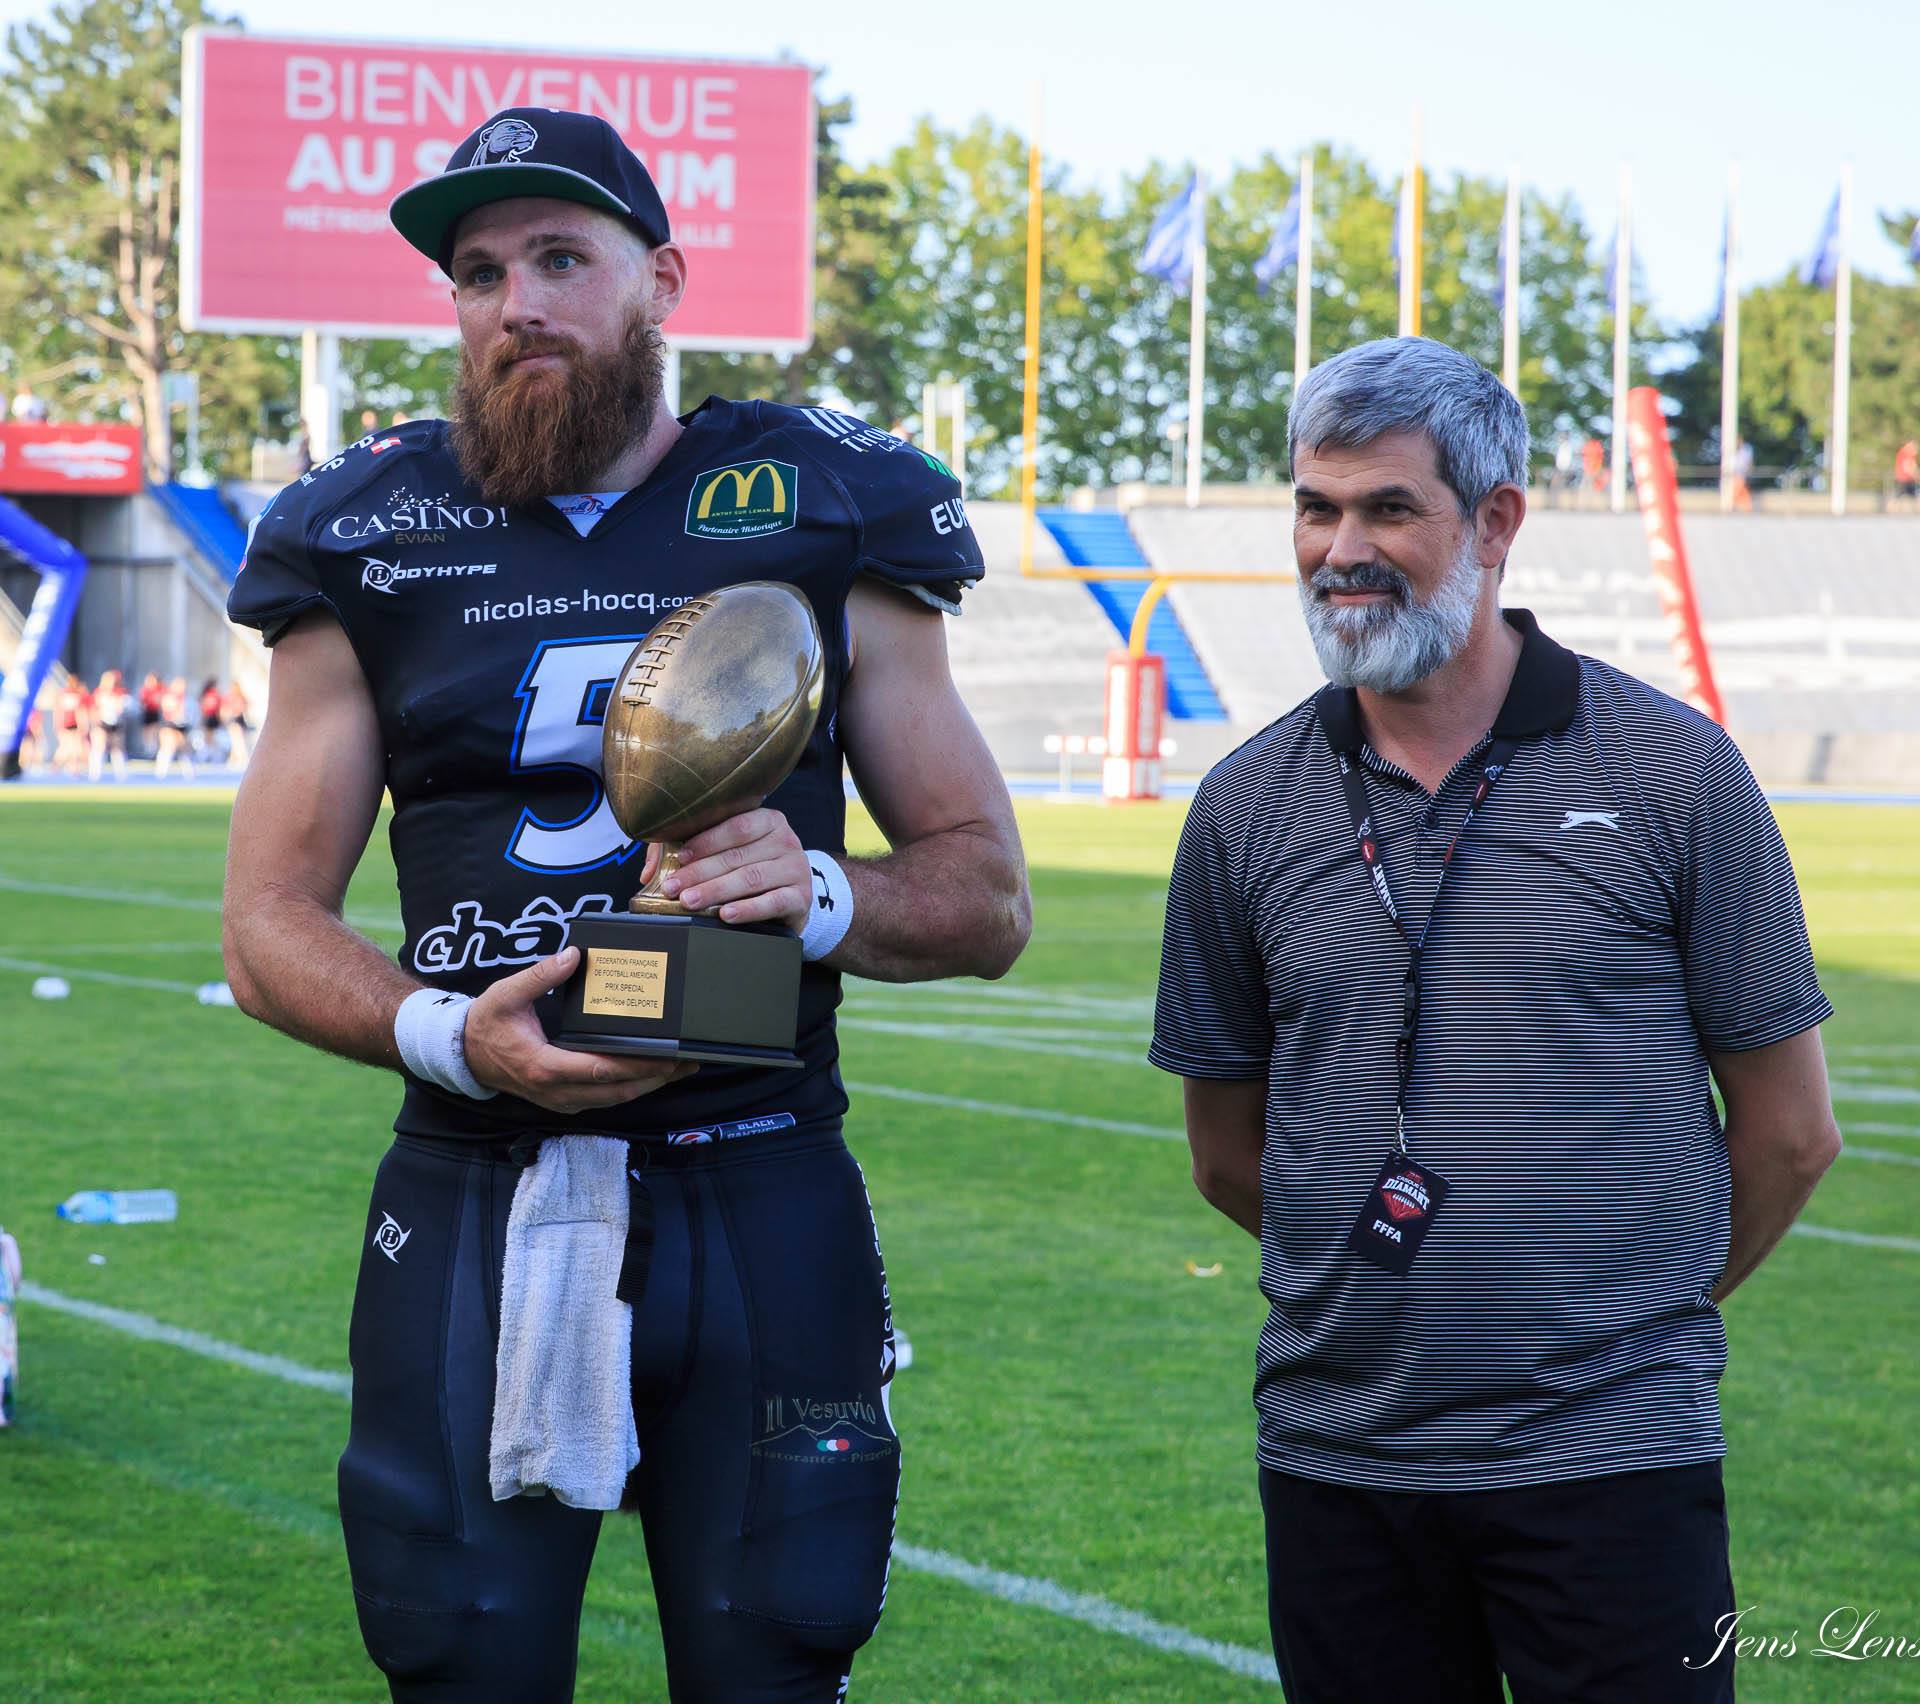 French League of American Football MVP Clark Evans: “Wonderful to be